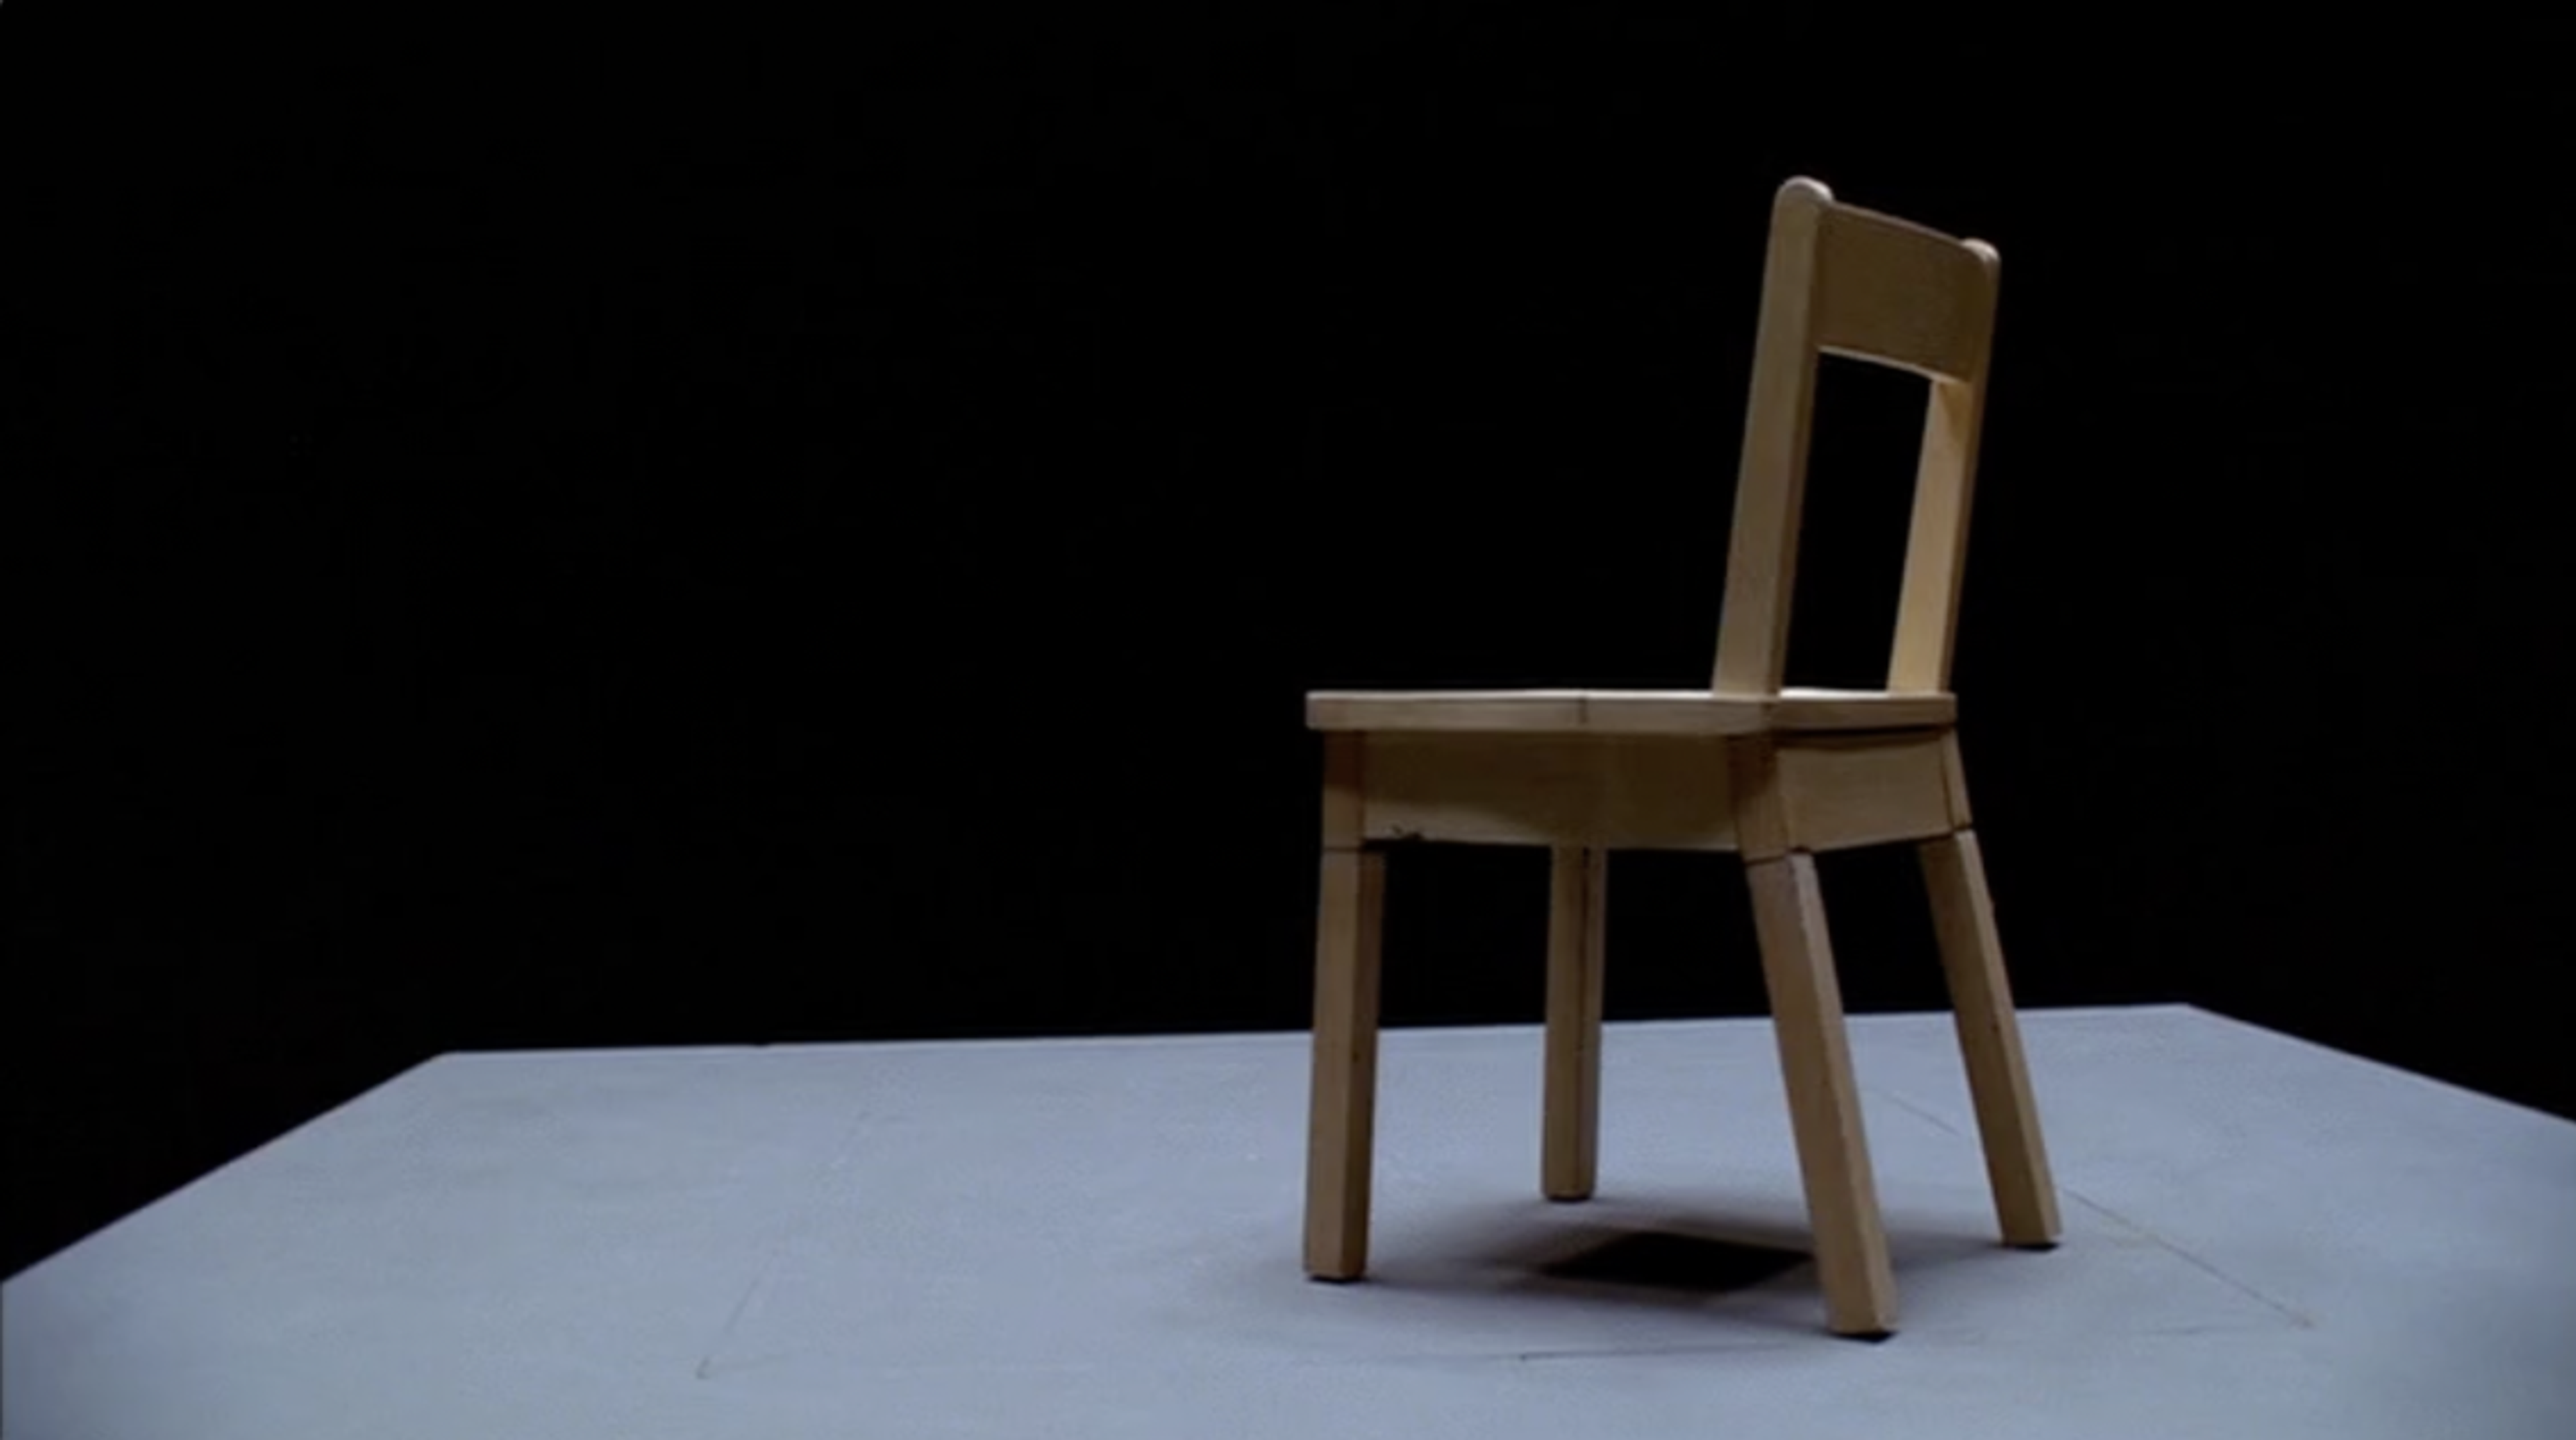 A normal looking wooden chair on a grey floor